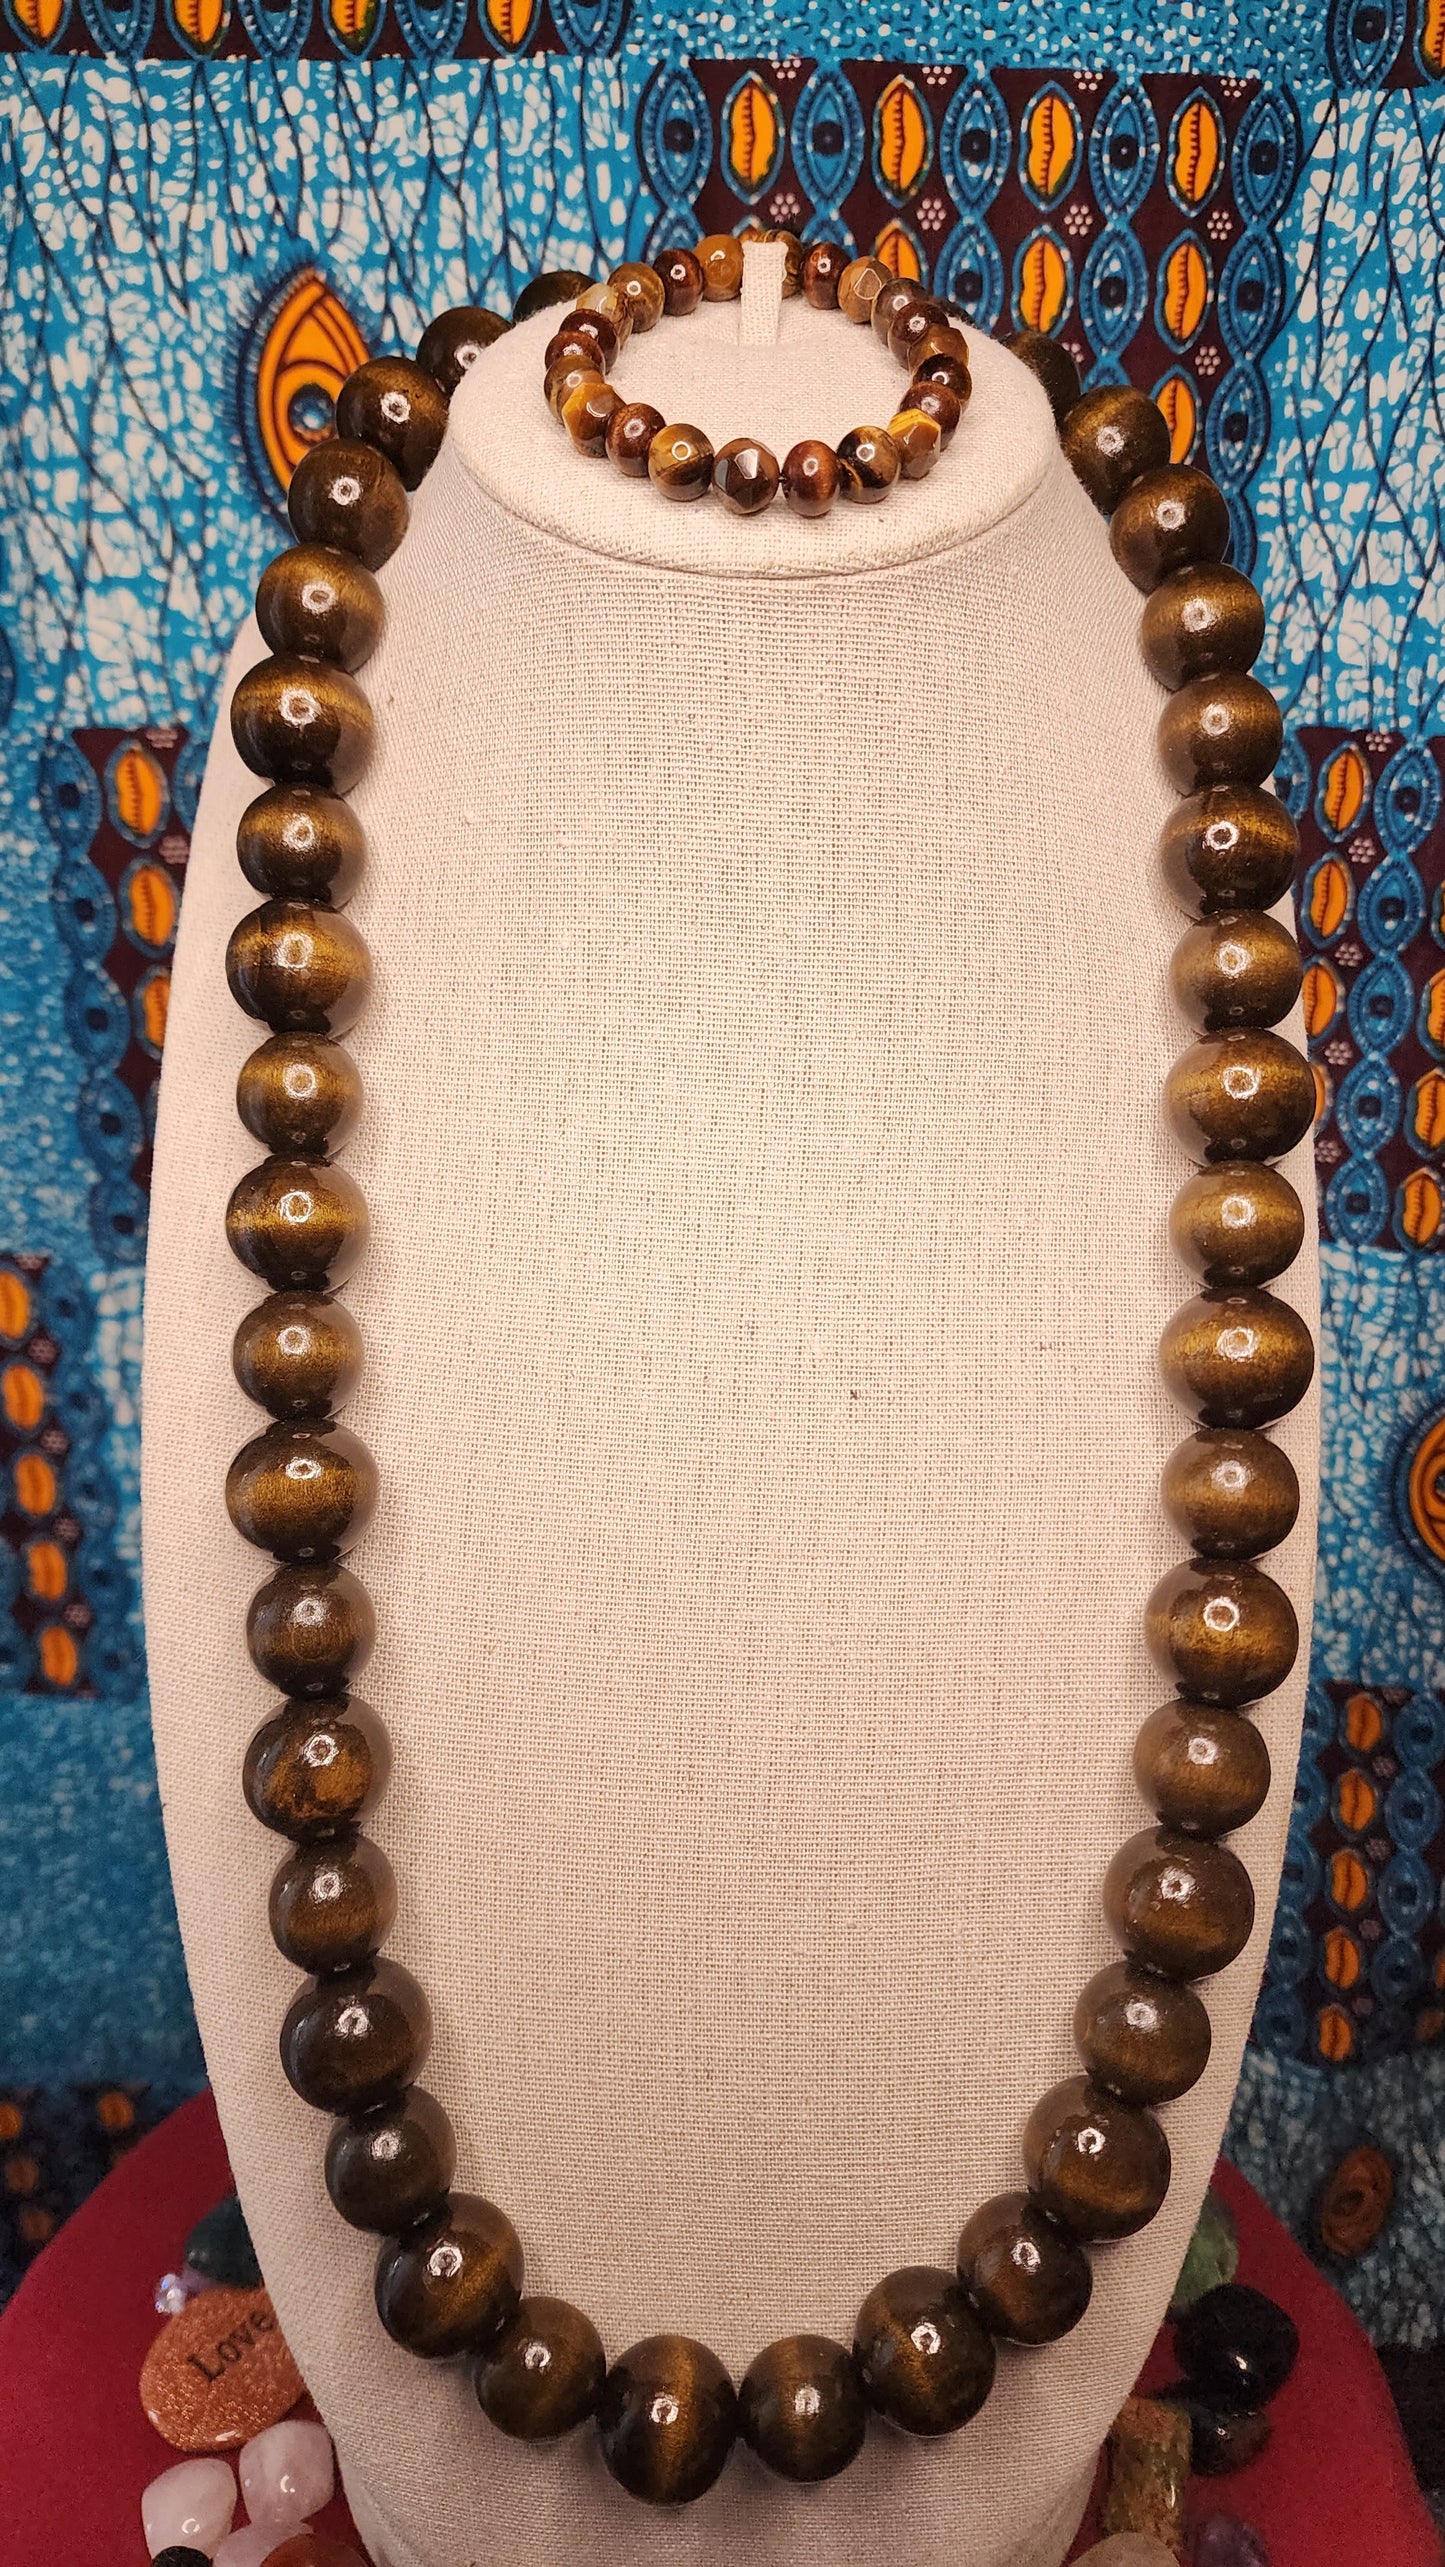 Large Wood Grain Beaded Necklace and Tiger's Eye With Wood Grain Beads Bracelet Set